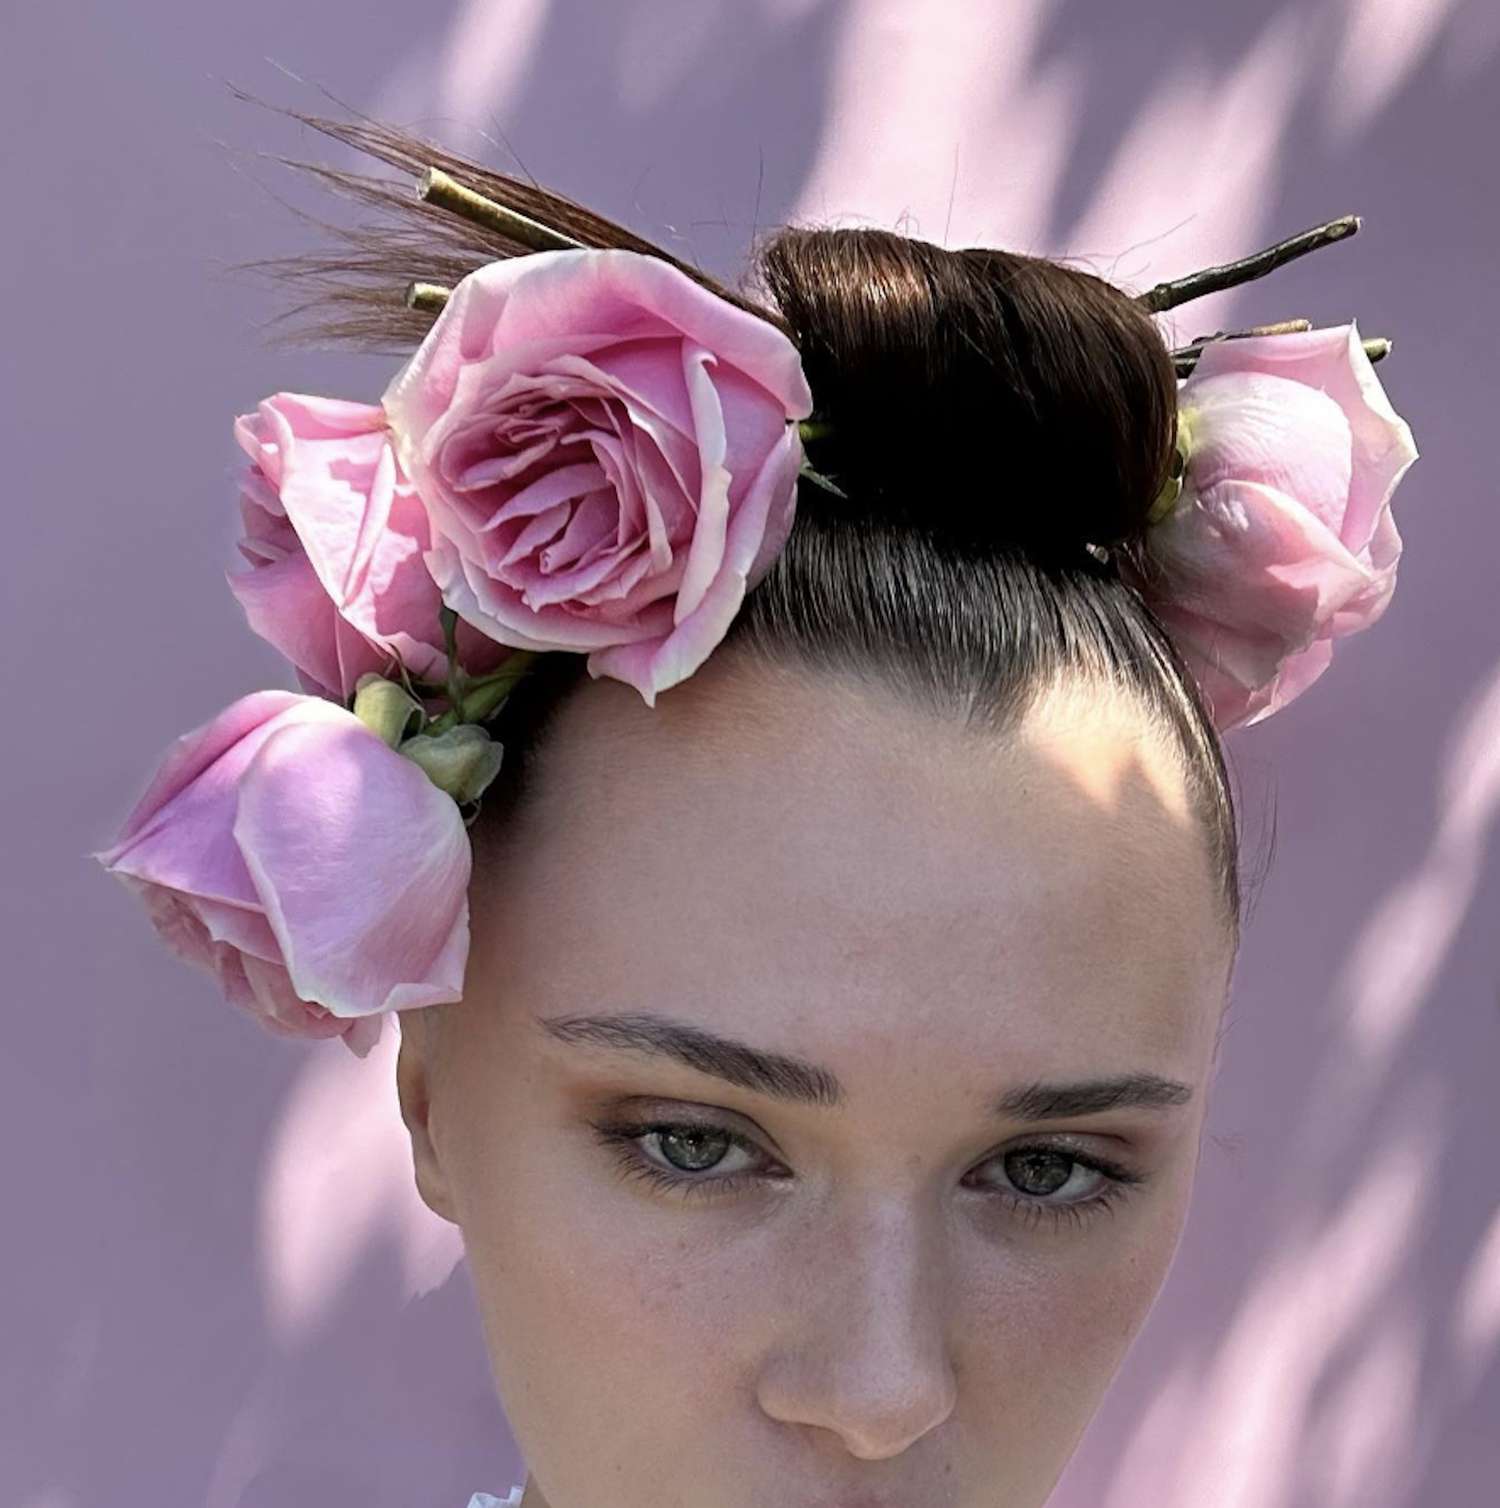 Close-up of woman with updo hairstyle with sticks and oversized roses